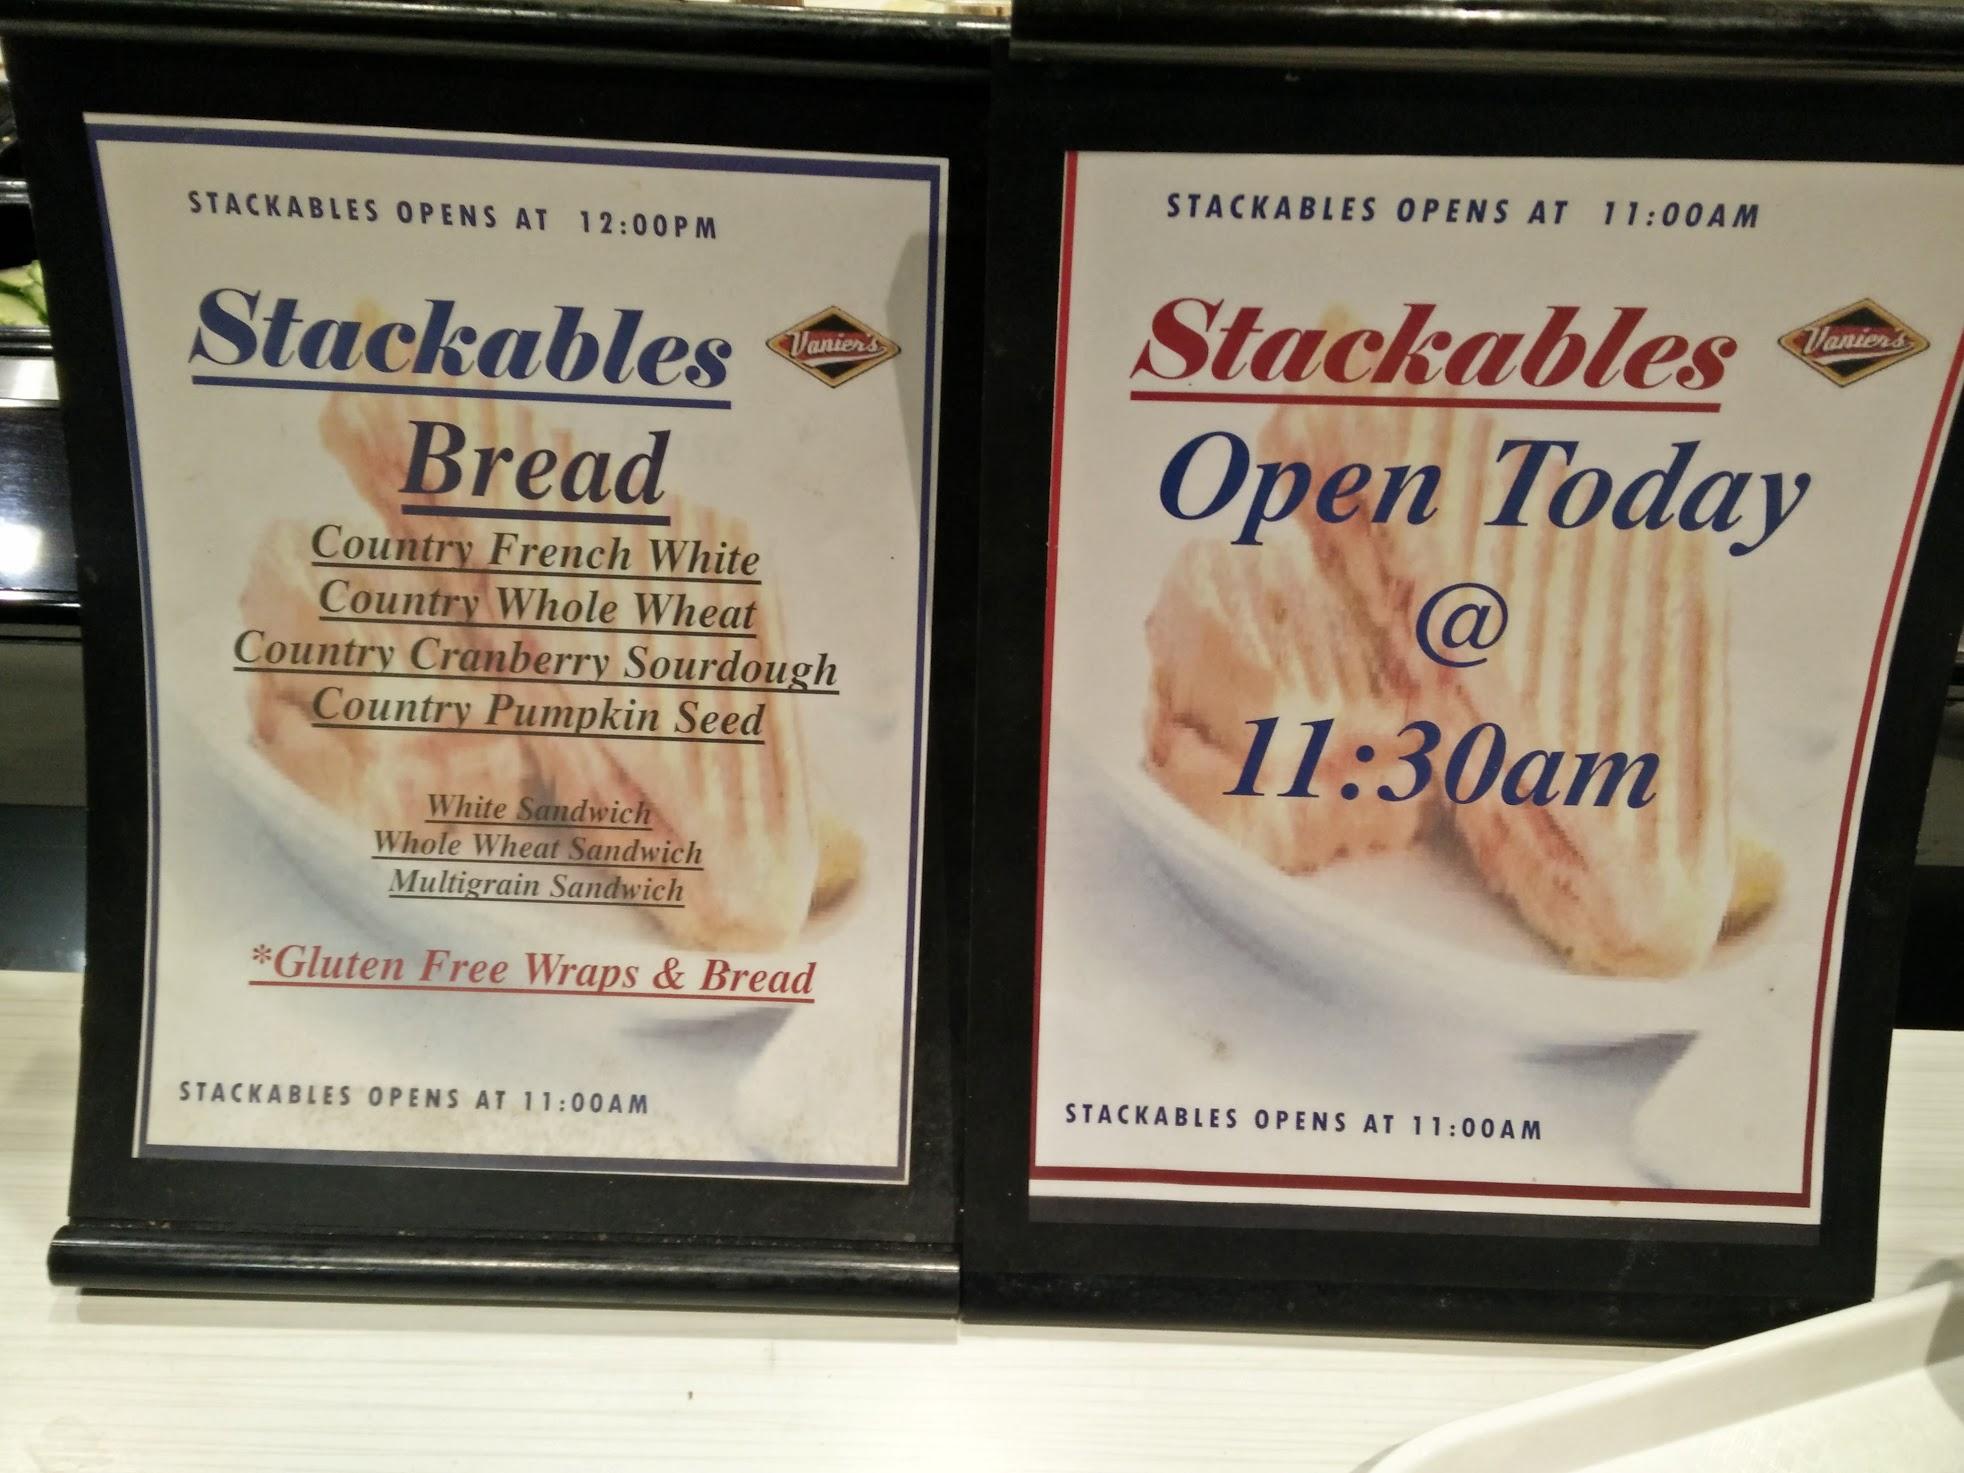 choix sinaloa - Stackables Opens At Pm Stackables Opens At Vaniers Stackables Bread Stackables Open Today Country French White Country Whole Wheat Country Cranberry Sourdough Country Pumpkin Seed @ am White Sandwich Whole Wheat Sandwich Multigrain Sandwic